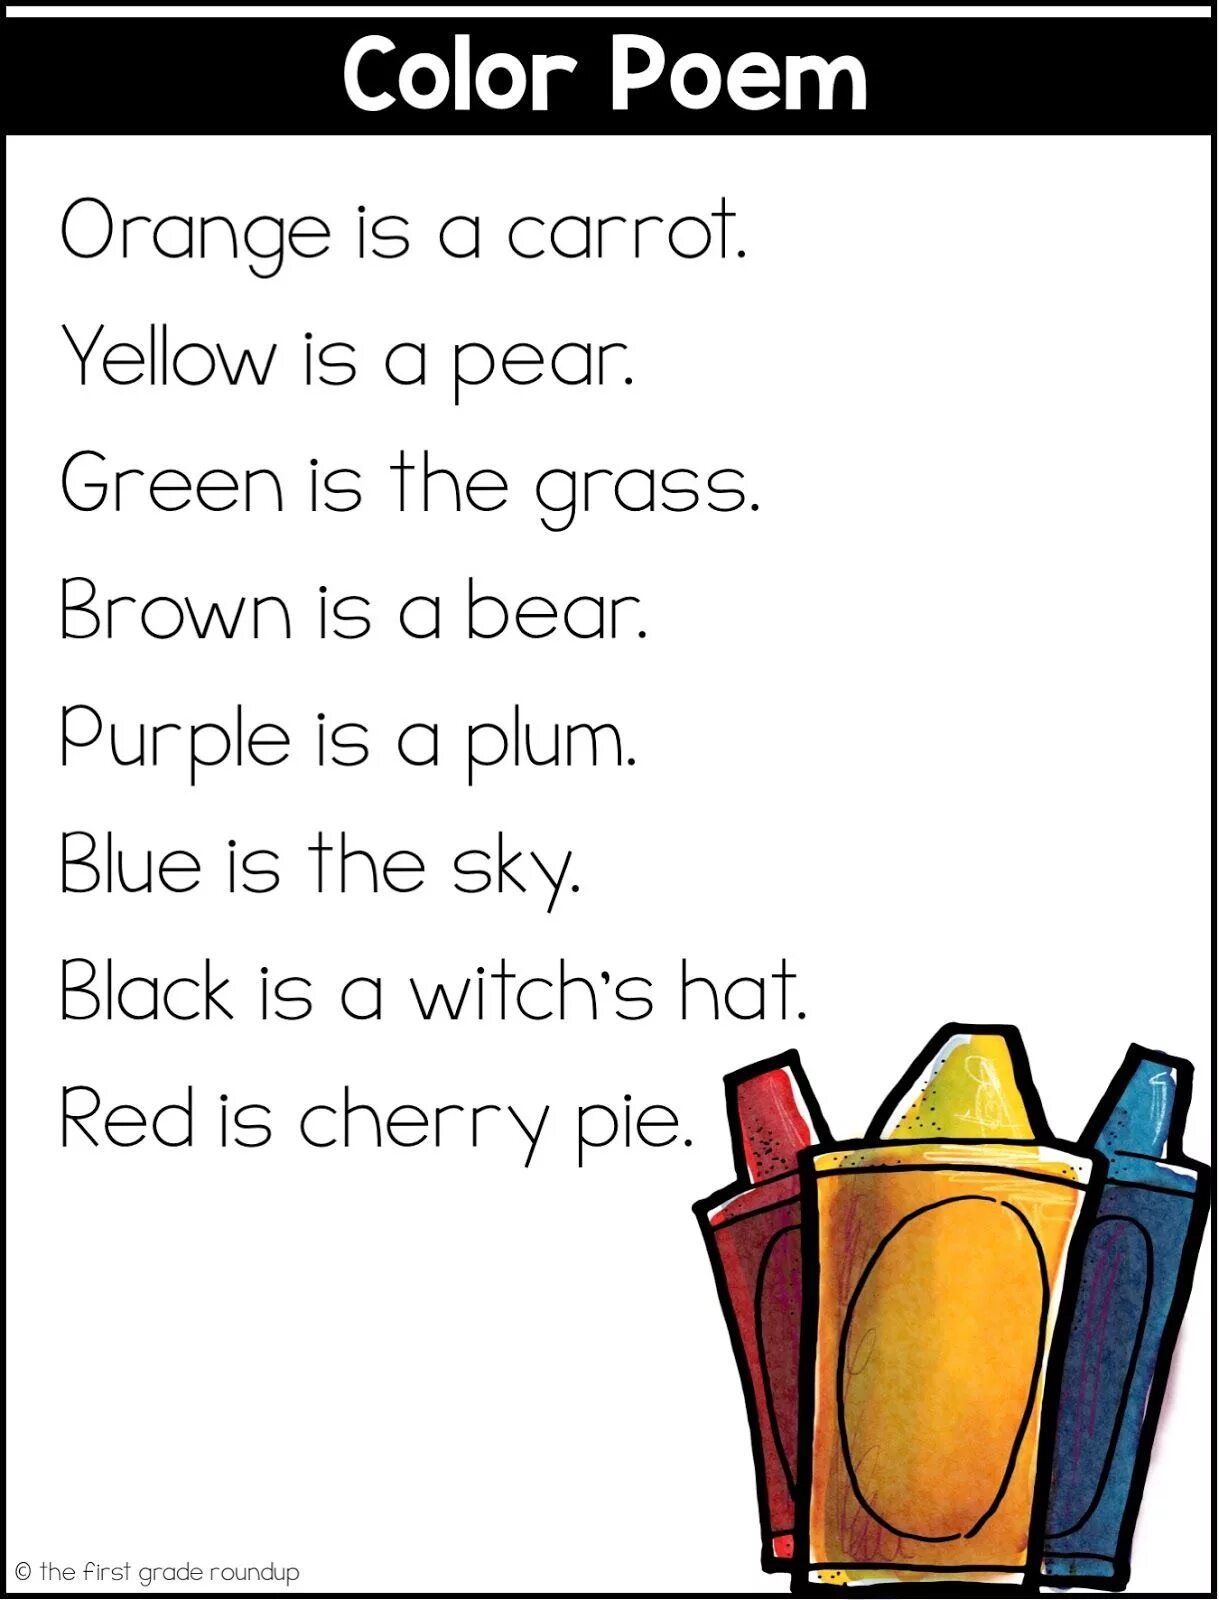 Poems for Kids. Easy poems for Kids. English for Kids poem simple. Poems about English for Kids.